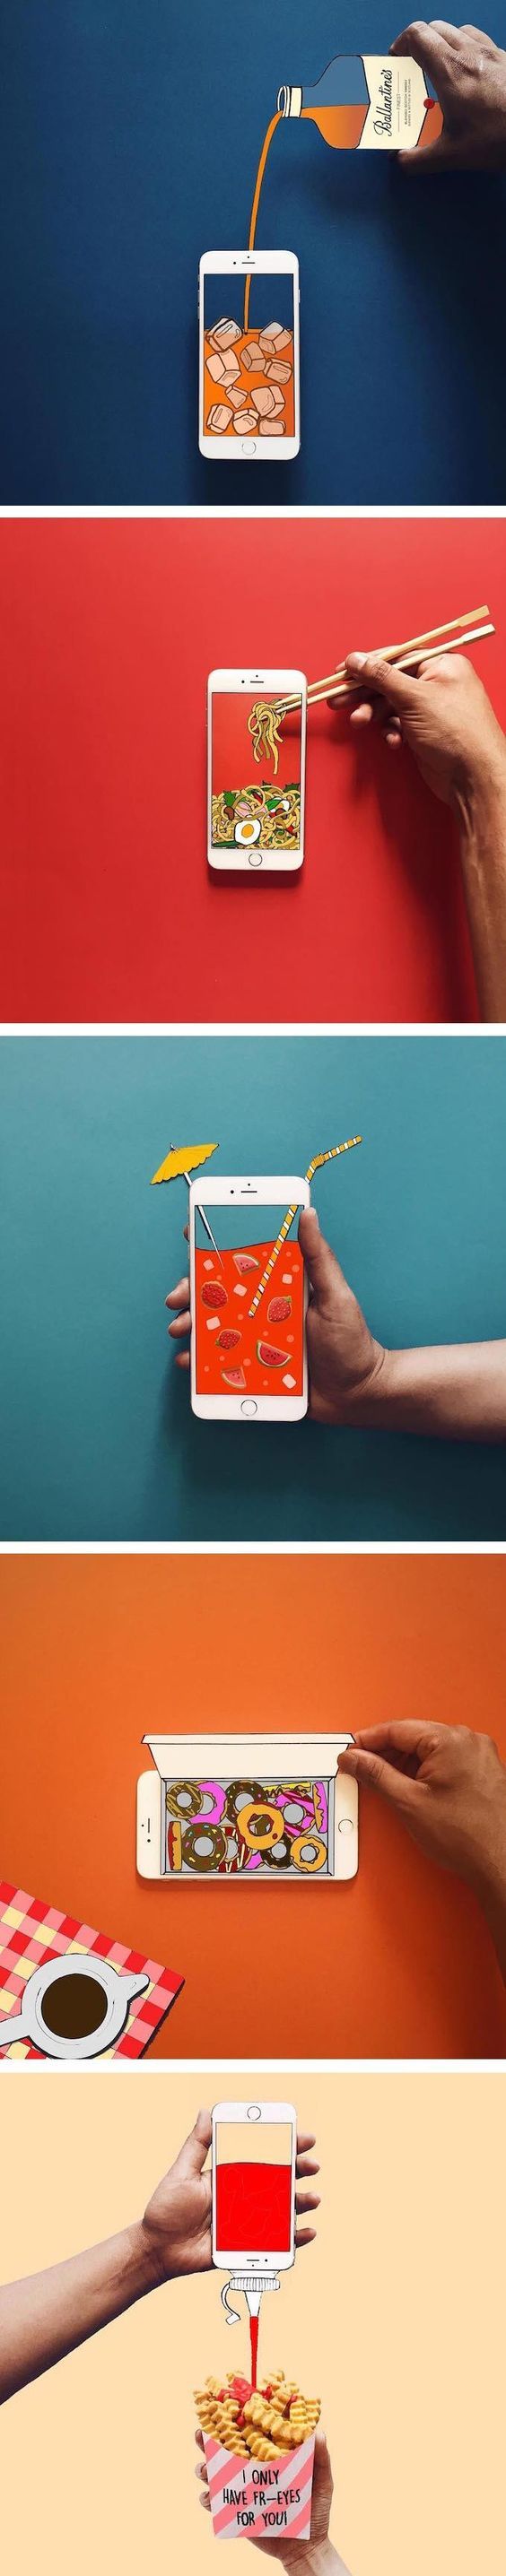 Creative-Advertising-Blurring-the-line-between-photography-and-illustration Creative Advertising : Blurring the line between photography and illustration. #food #foodillustration ...